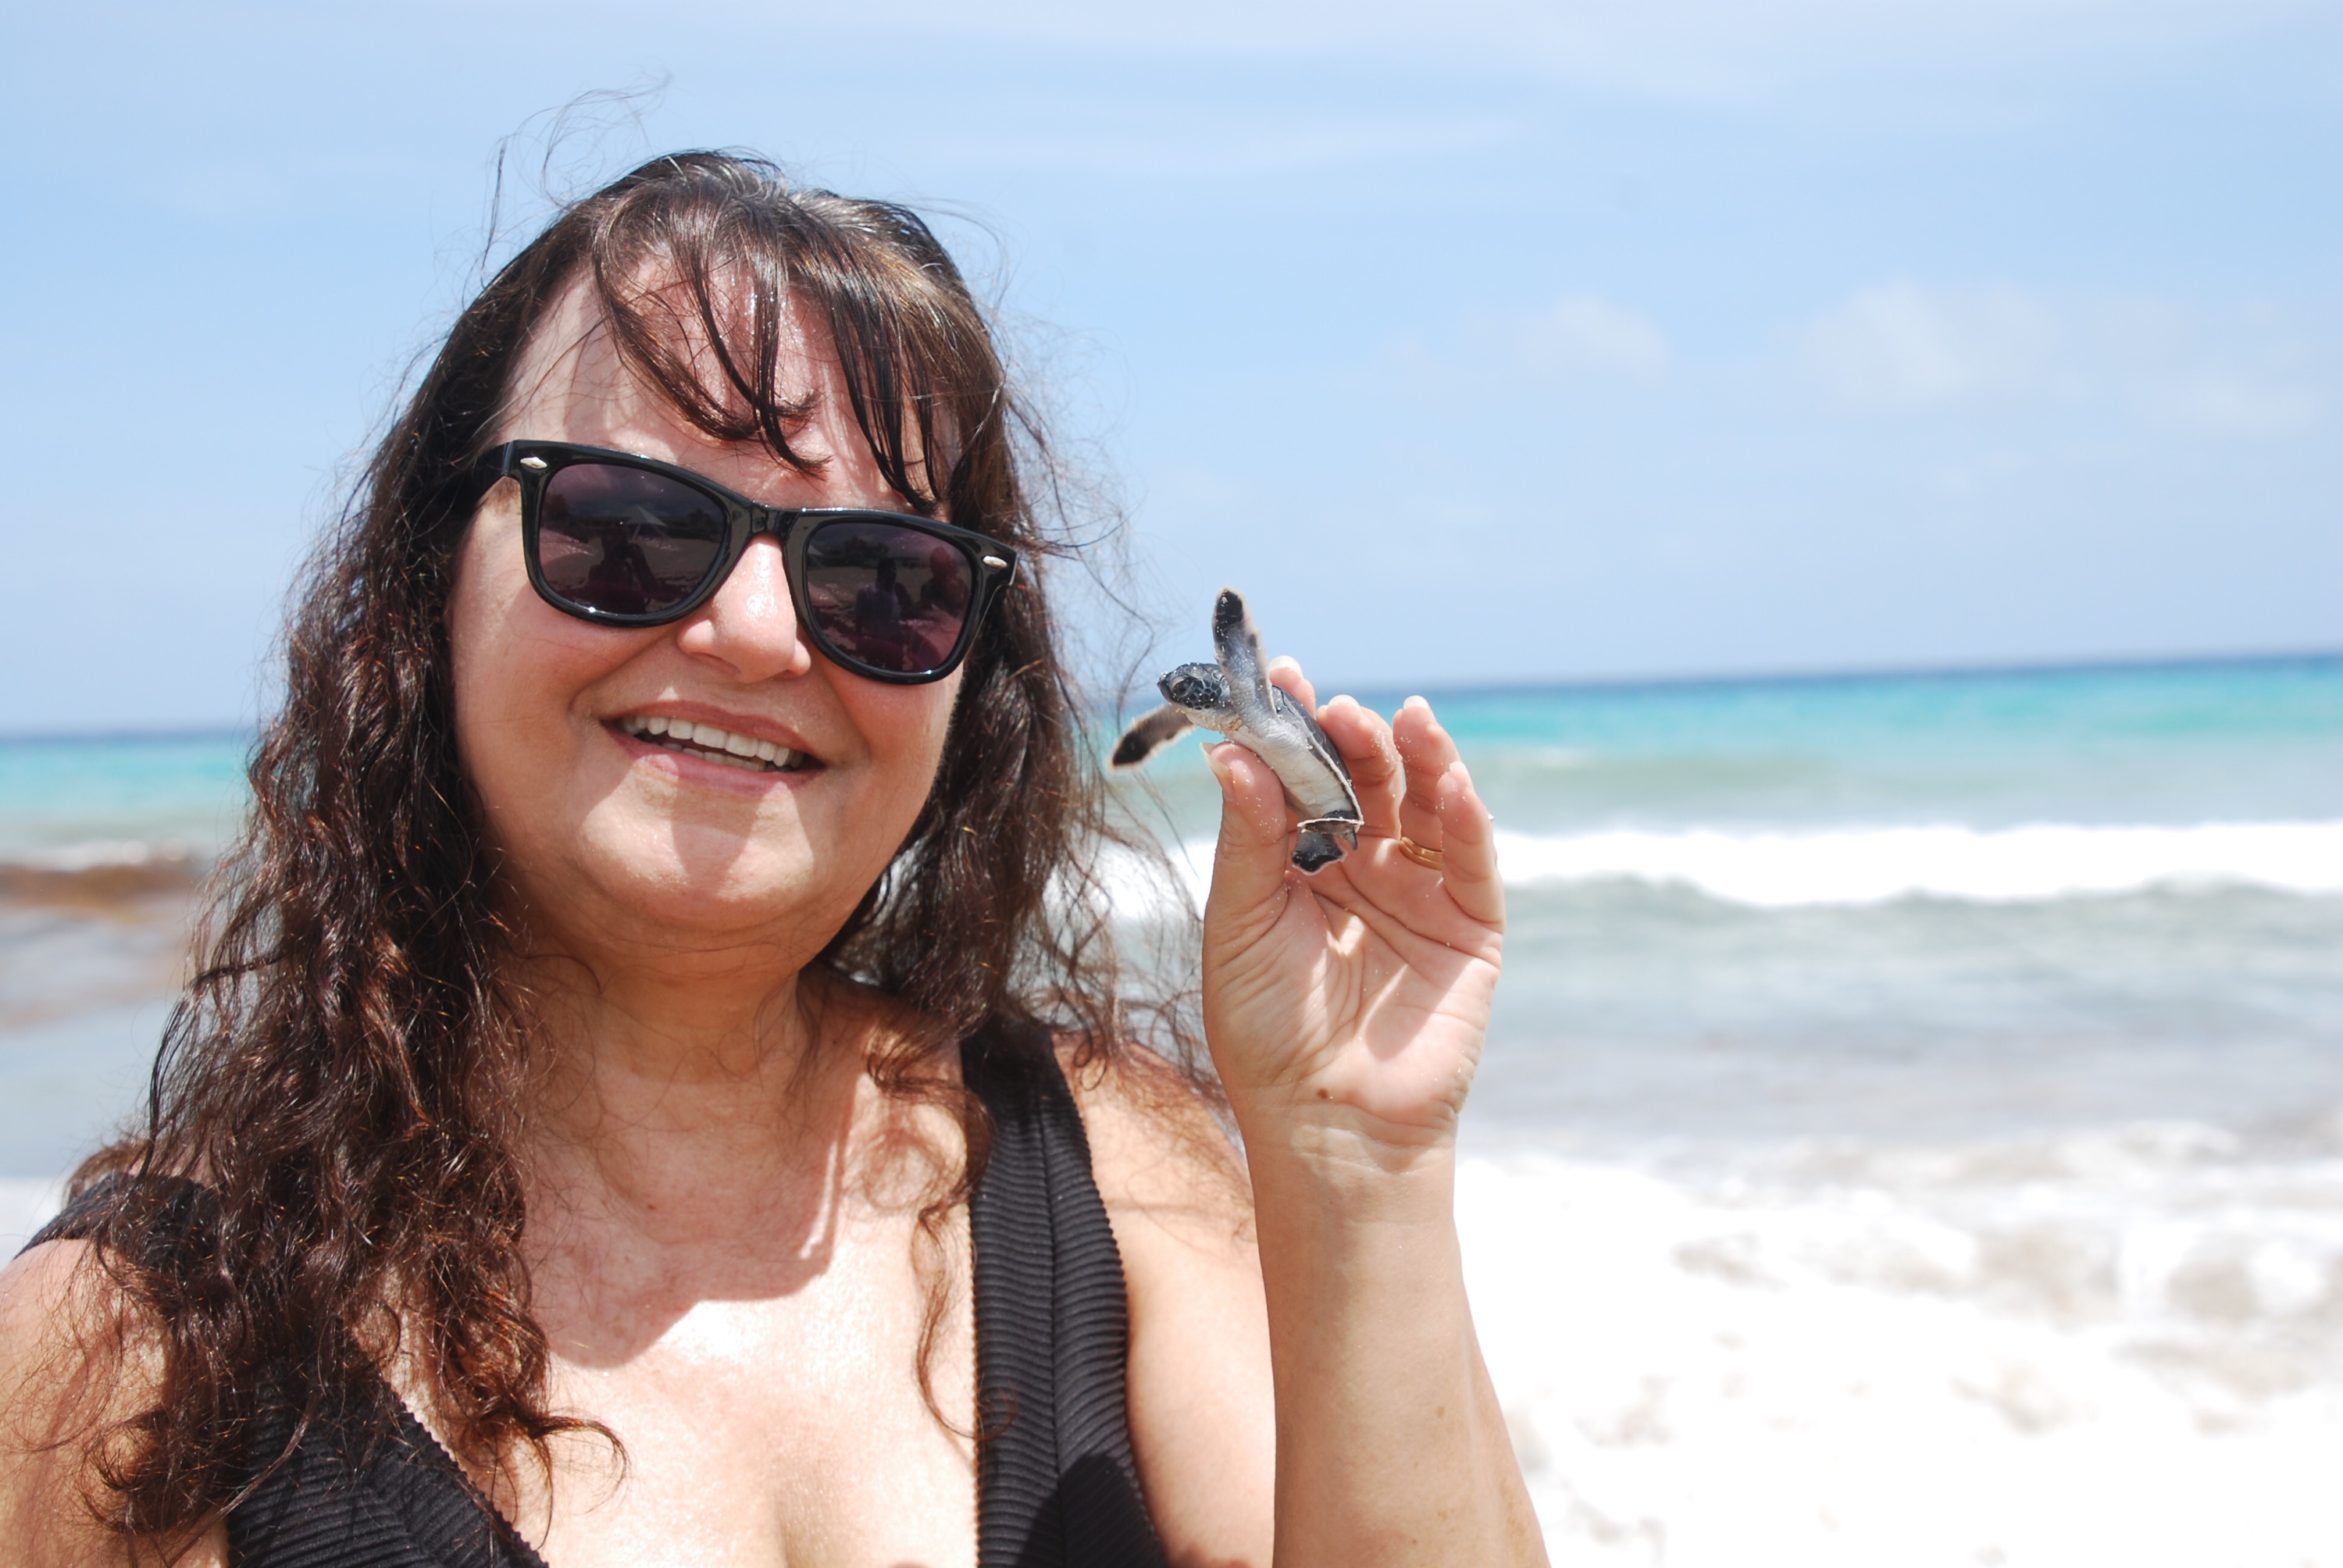 Thats me holding a newly hatched sea turtle found on the beach in Cancun! what a wonderful experience! Photo copyright Valerie Duty Citrano